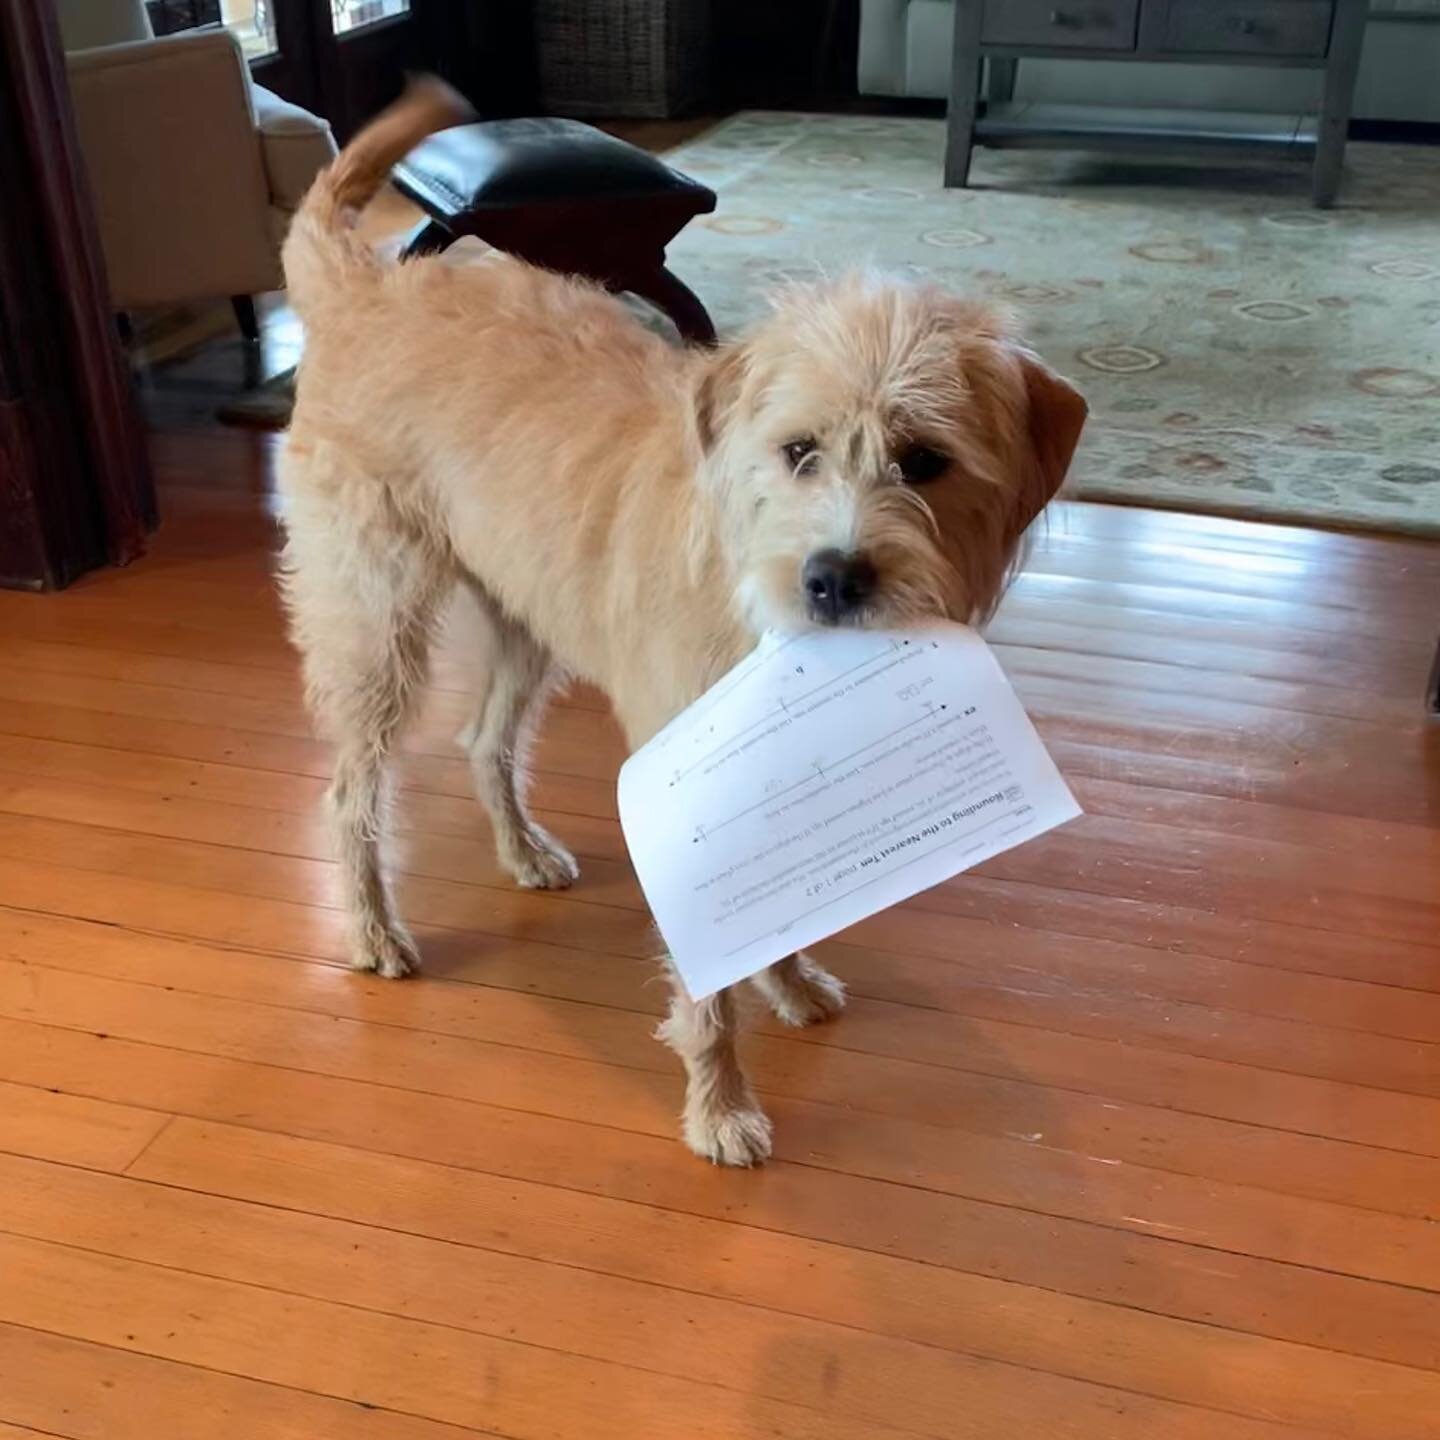 2020 home learning instructor for the Benson boys 🐾 

#dogteacher #thedogatemyhomework #athomelearning #pandemic2020 #poodlesofinstagram